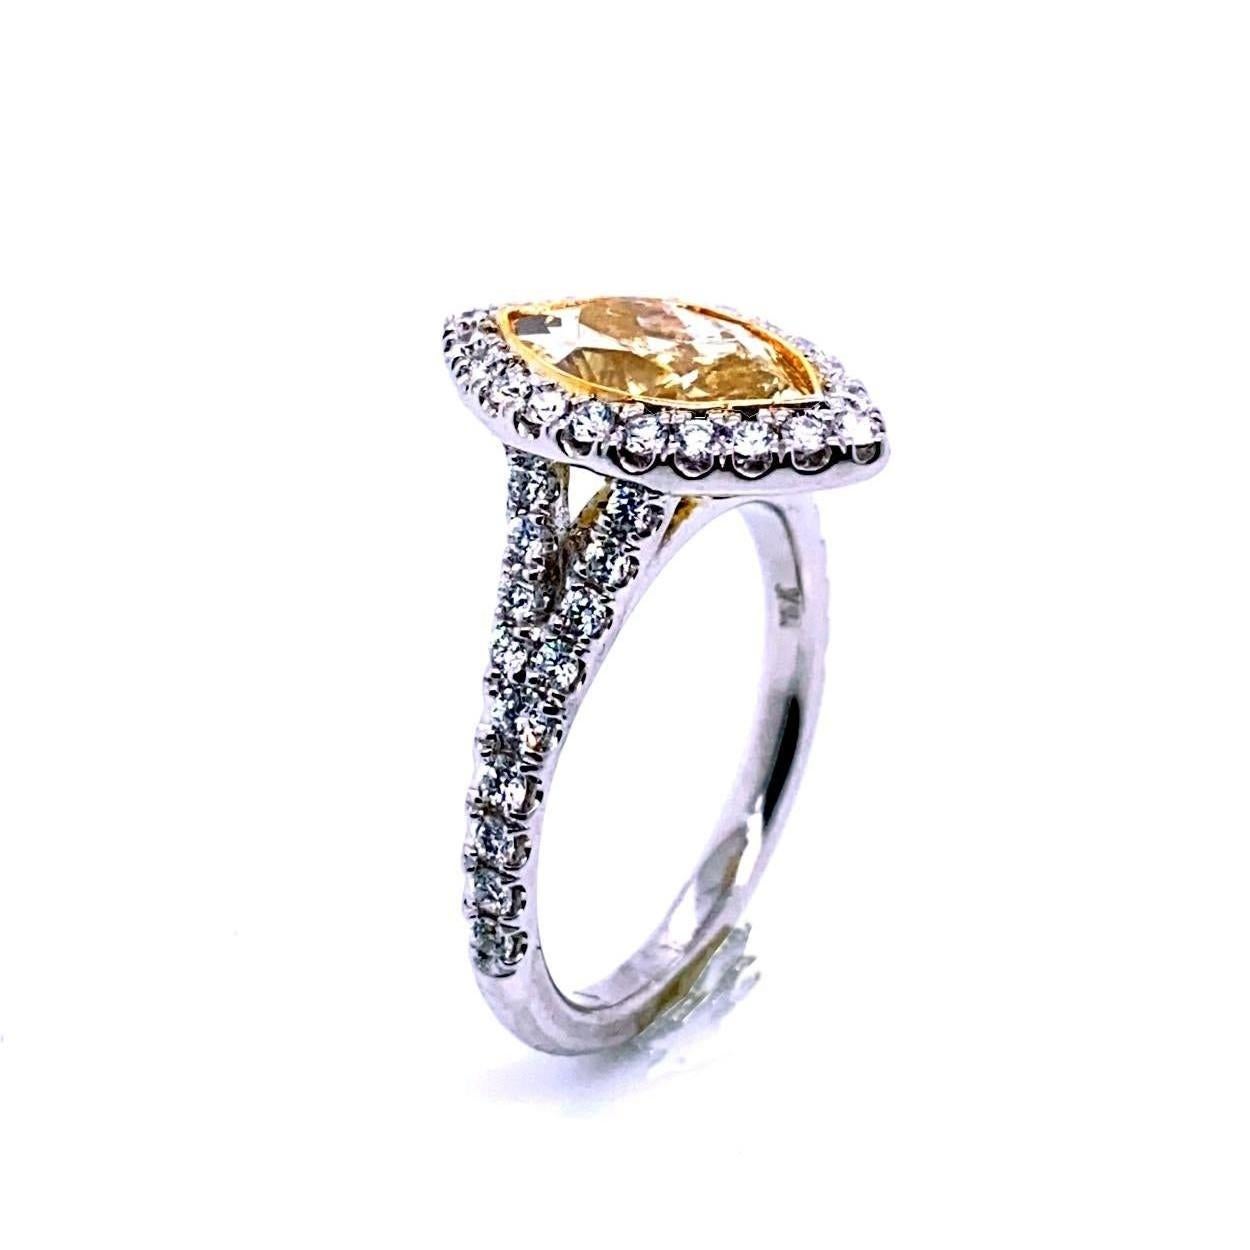 Marquise Cut 1.5 Carat Yellow MQ Diamond in Pave Set 18 Karat Split Shank Ring with Halo For Sale